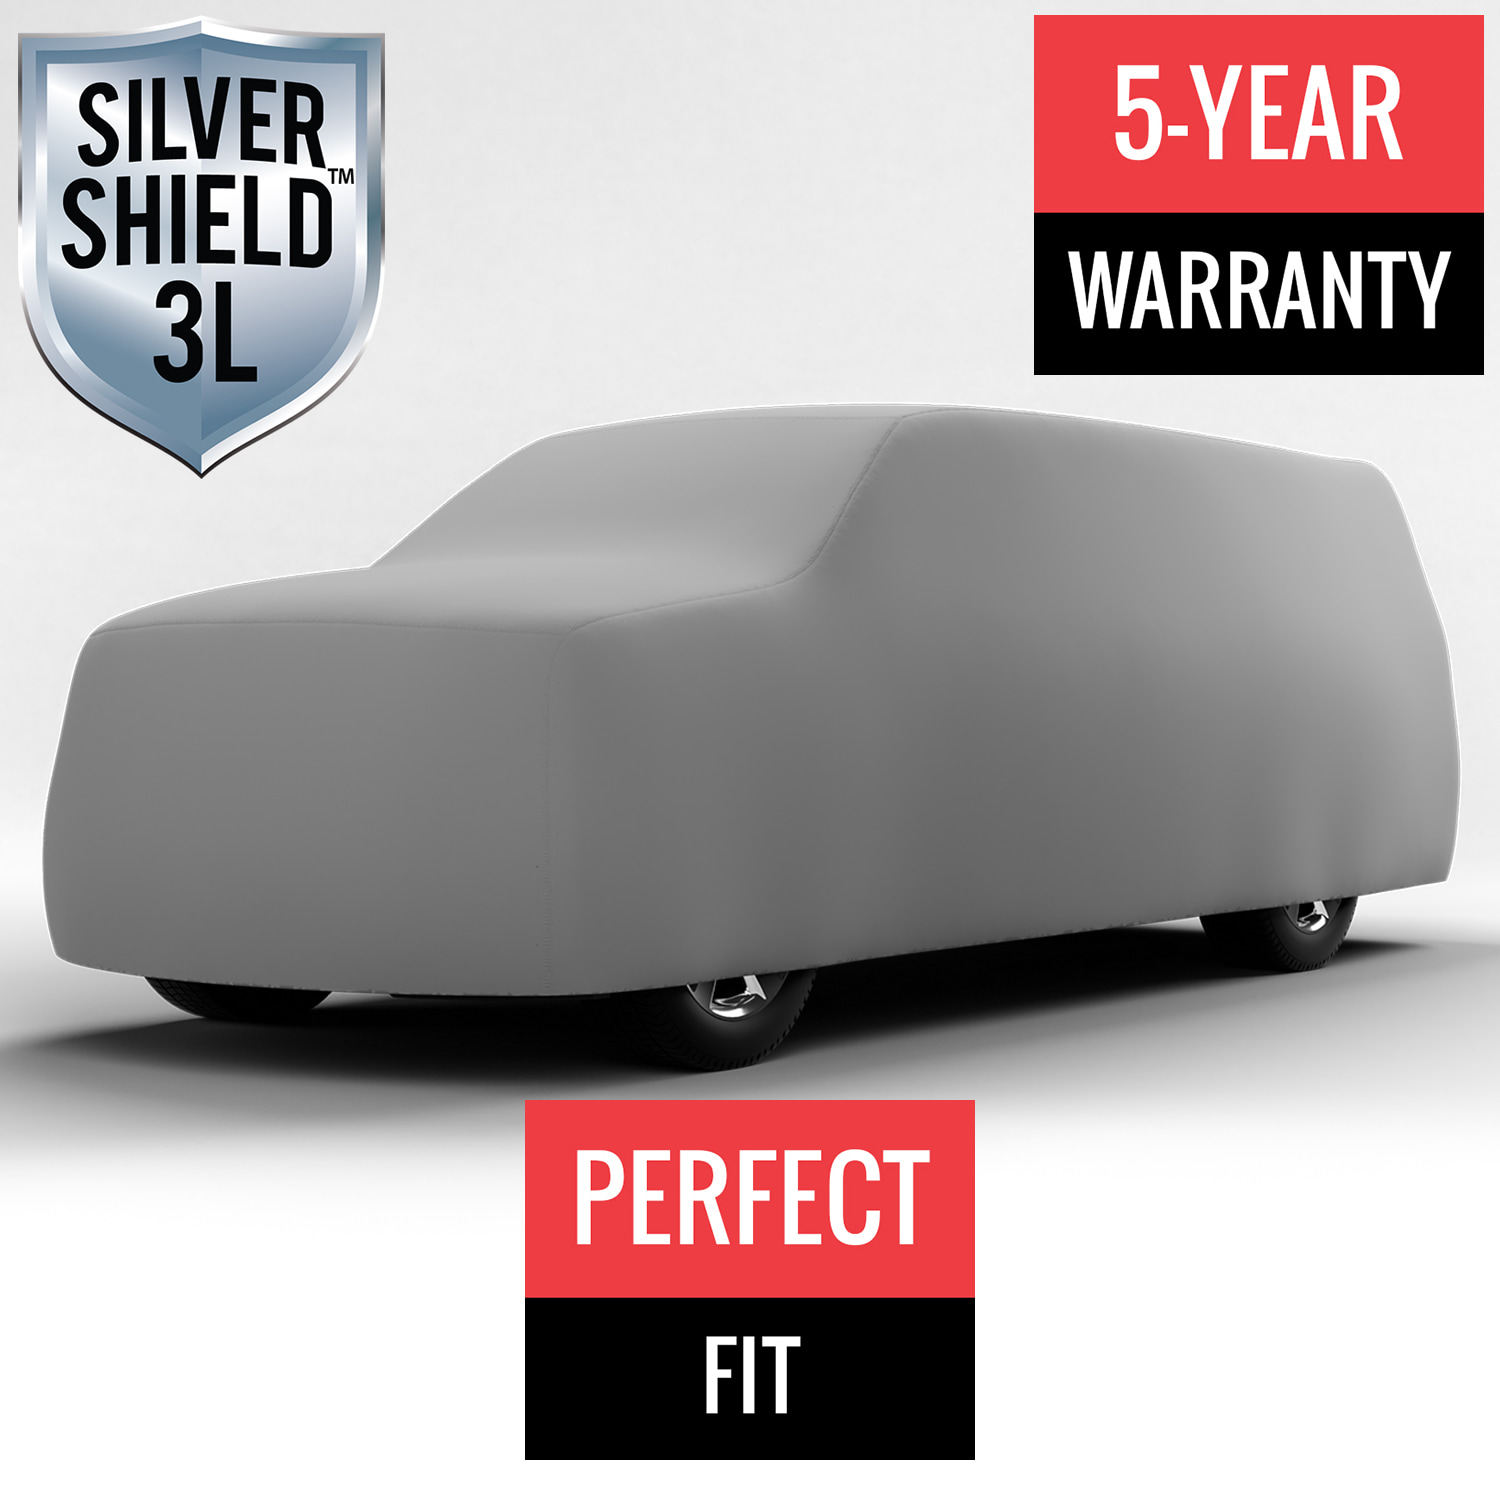 Silver Shield 3L - Car Cover for GMC C1500 1997 Regular Cab Pickup 8.0 Feet Bed with Camper Shell